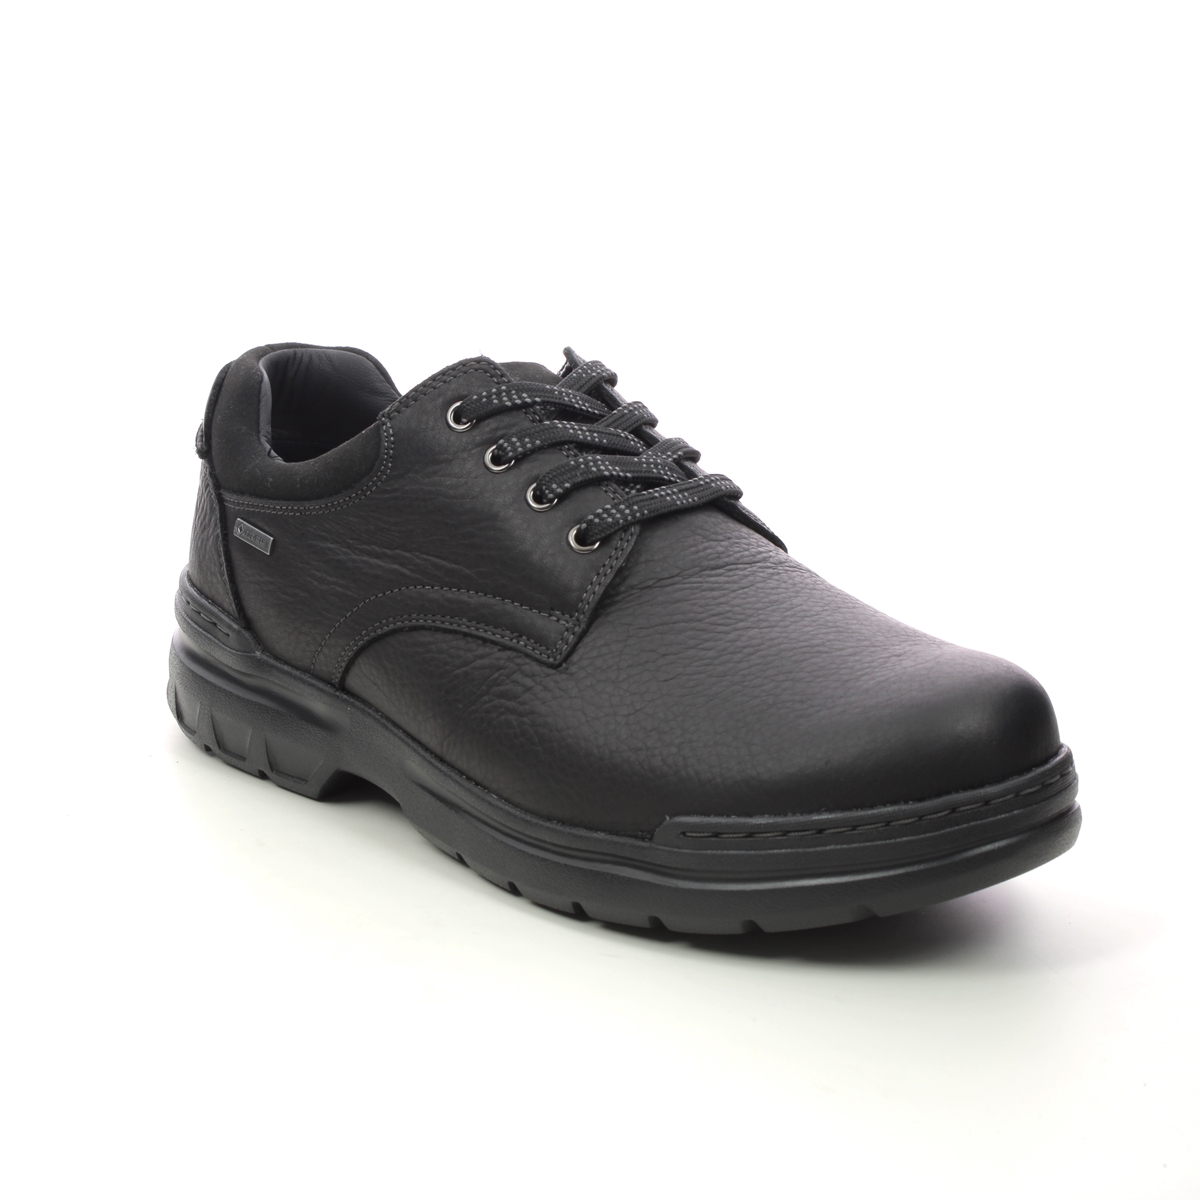 Clarks Rockie Walk Gtx Black Leather Mens Comfort Shoes 734648H In Size 7.5 In Plain Black Leather H Width Fitting Extra Wide